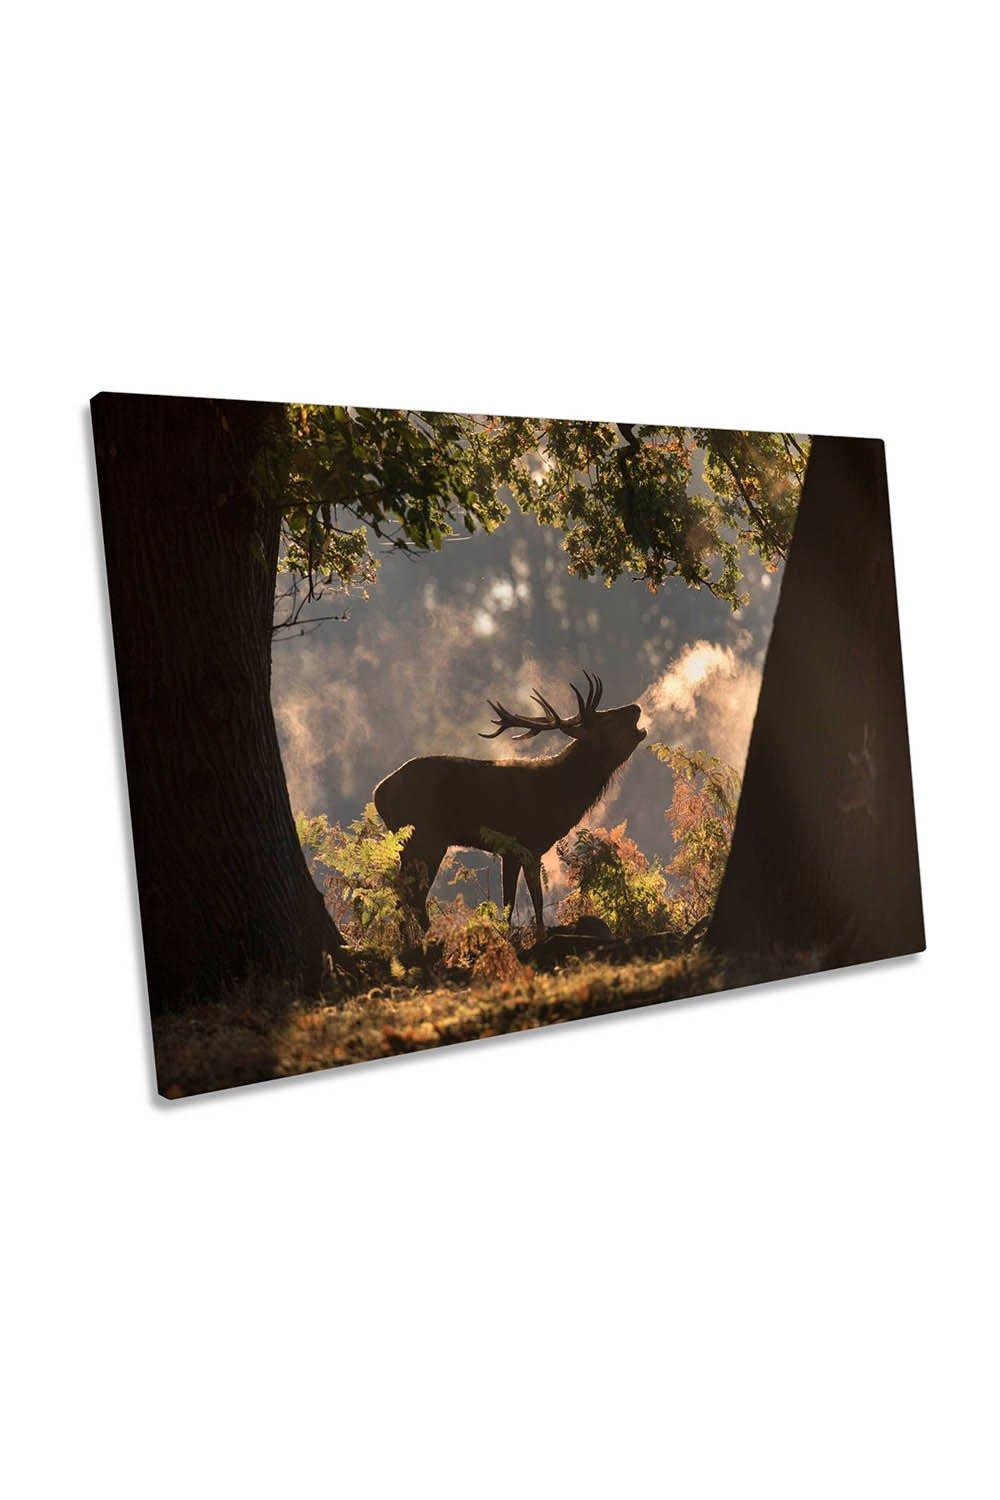 He Waits in the Shadows Stag Wildlife Canvas Wall Art Picture Print